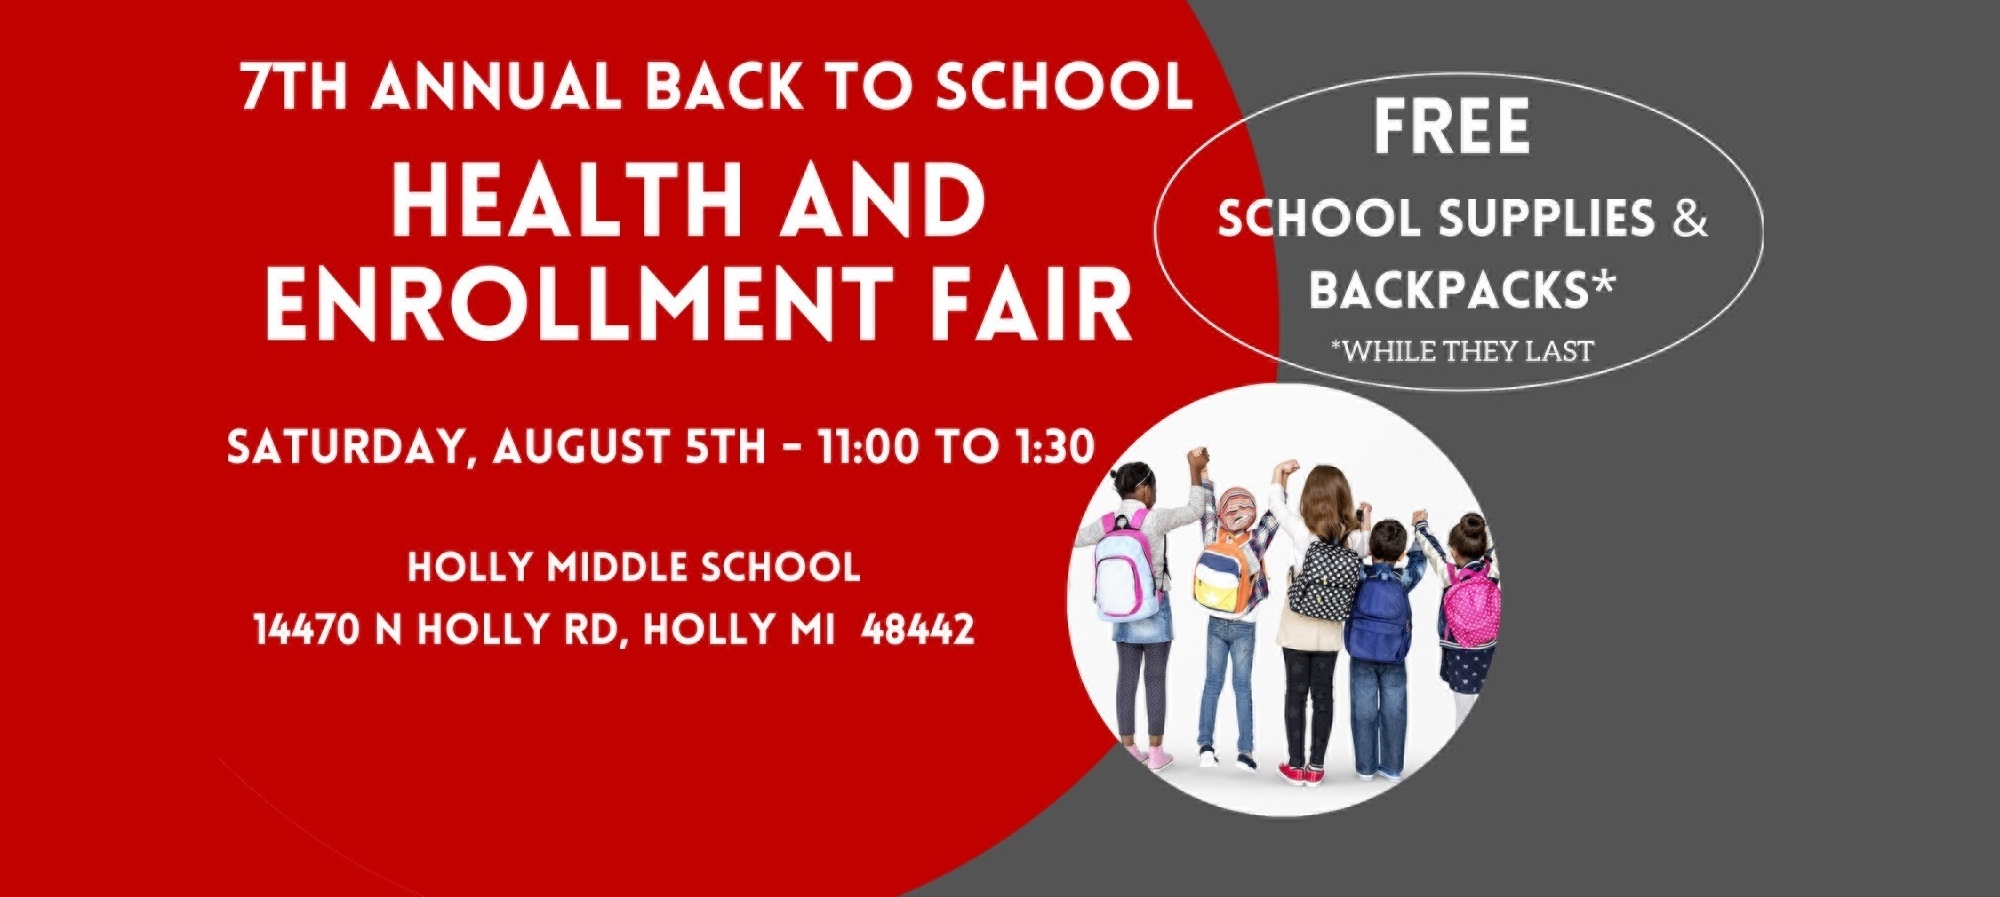 7th Annual Back to School Health and Enrollment Fair Flyer Image